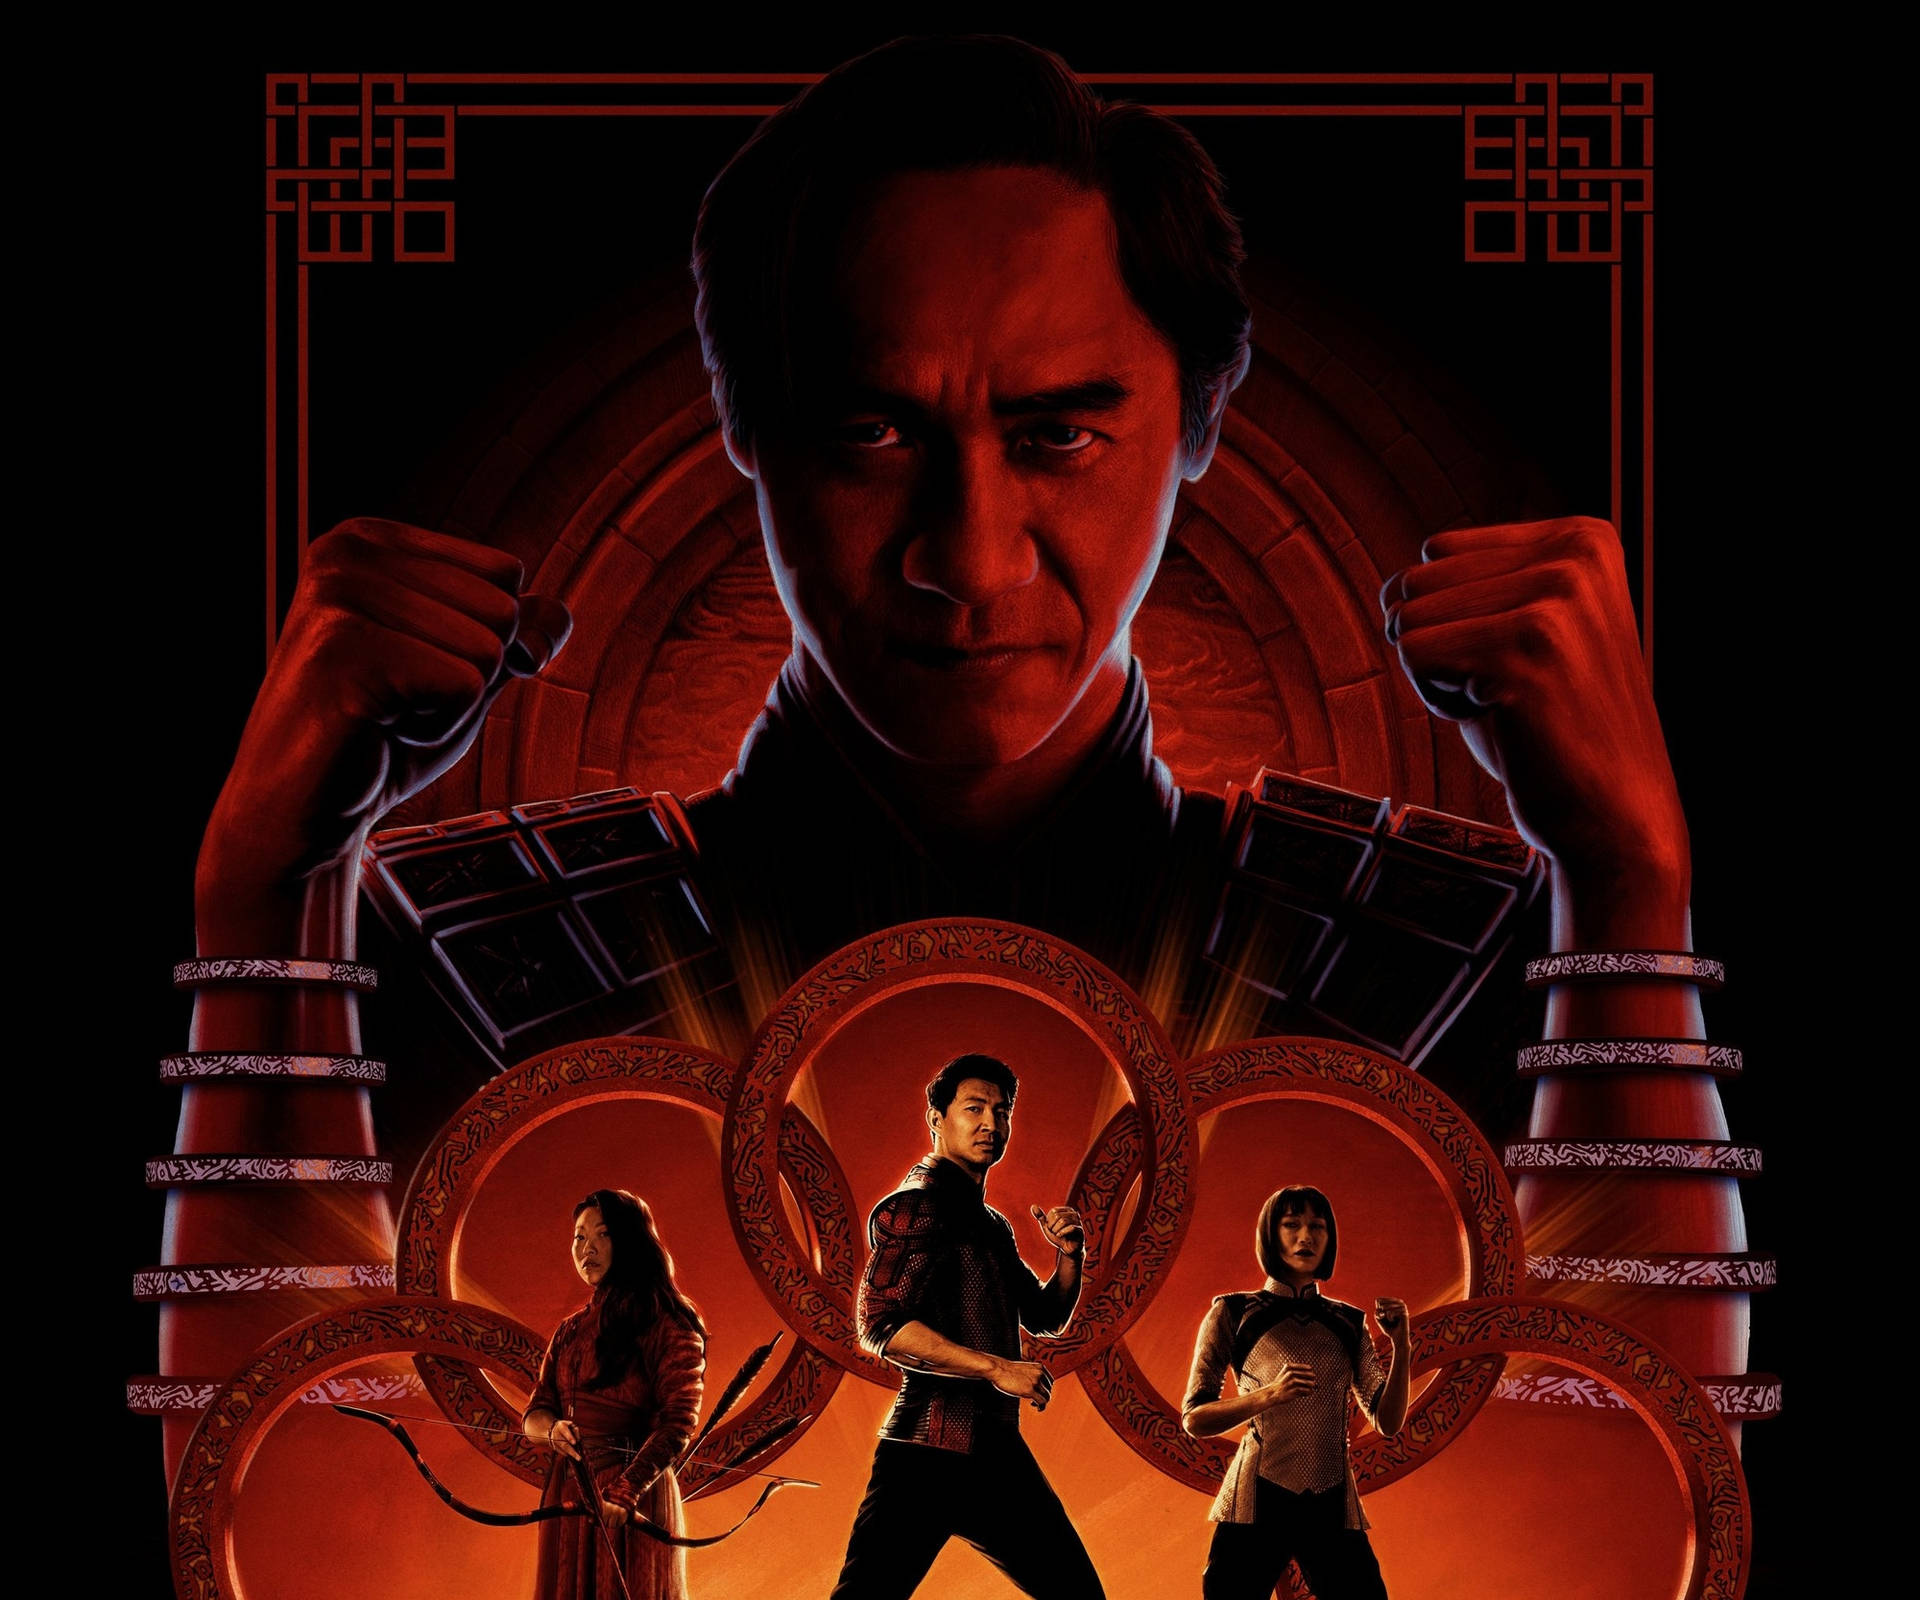 Top 999+ Shang Chi And The Legend Of The Ten Rings Wallpaper Full HD, 4K✅Free to Use